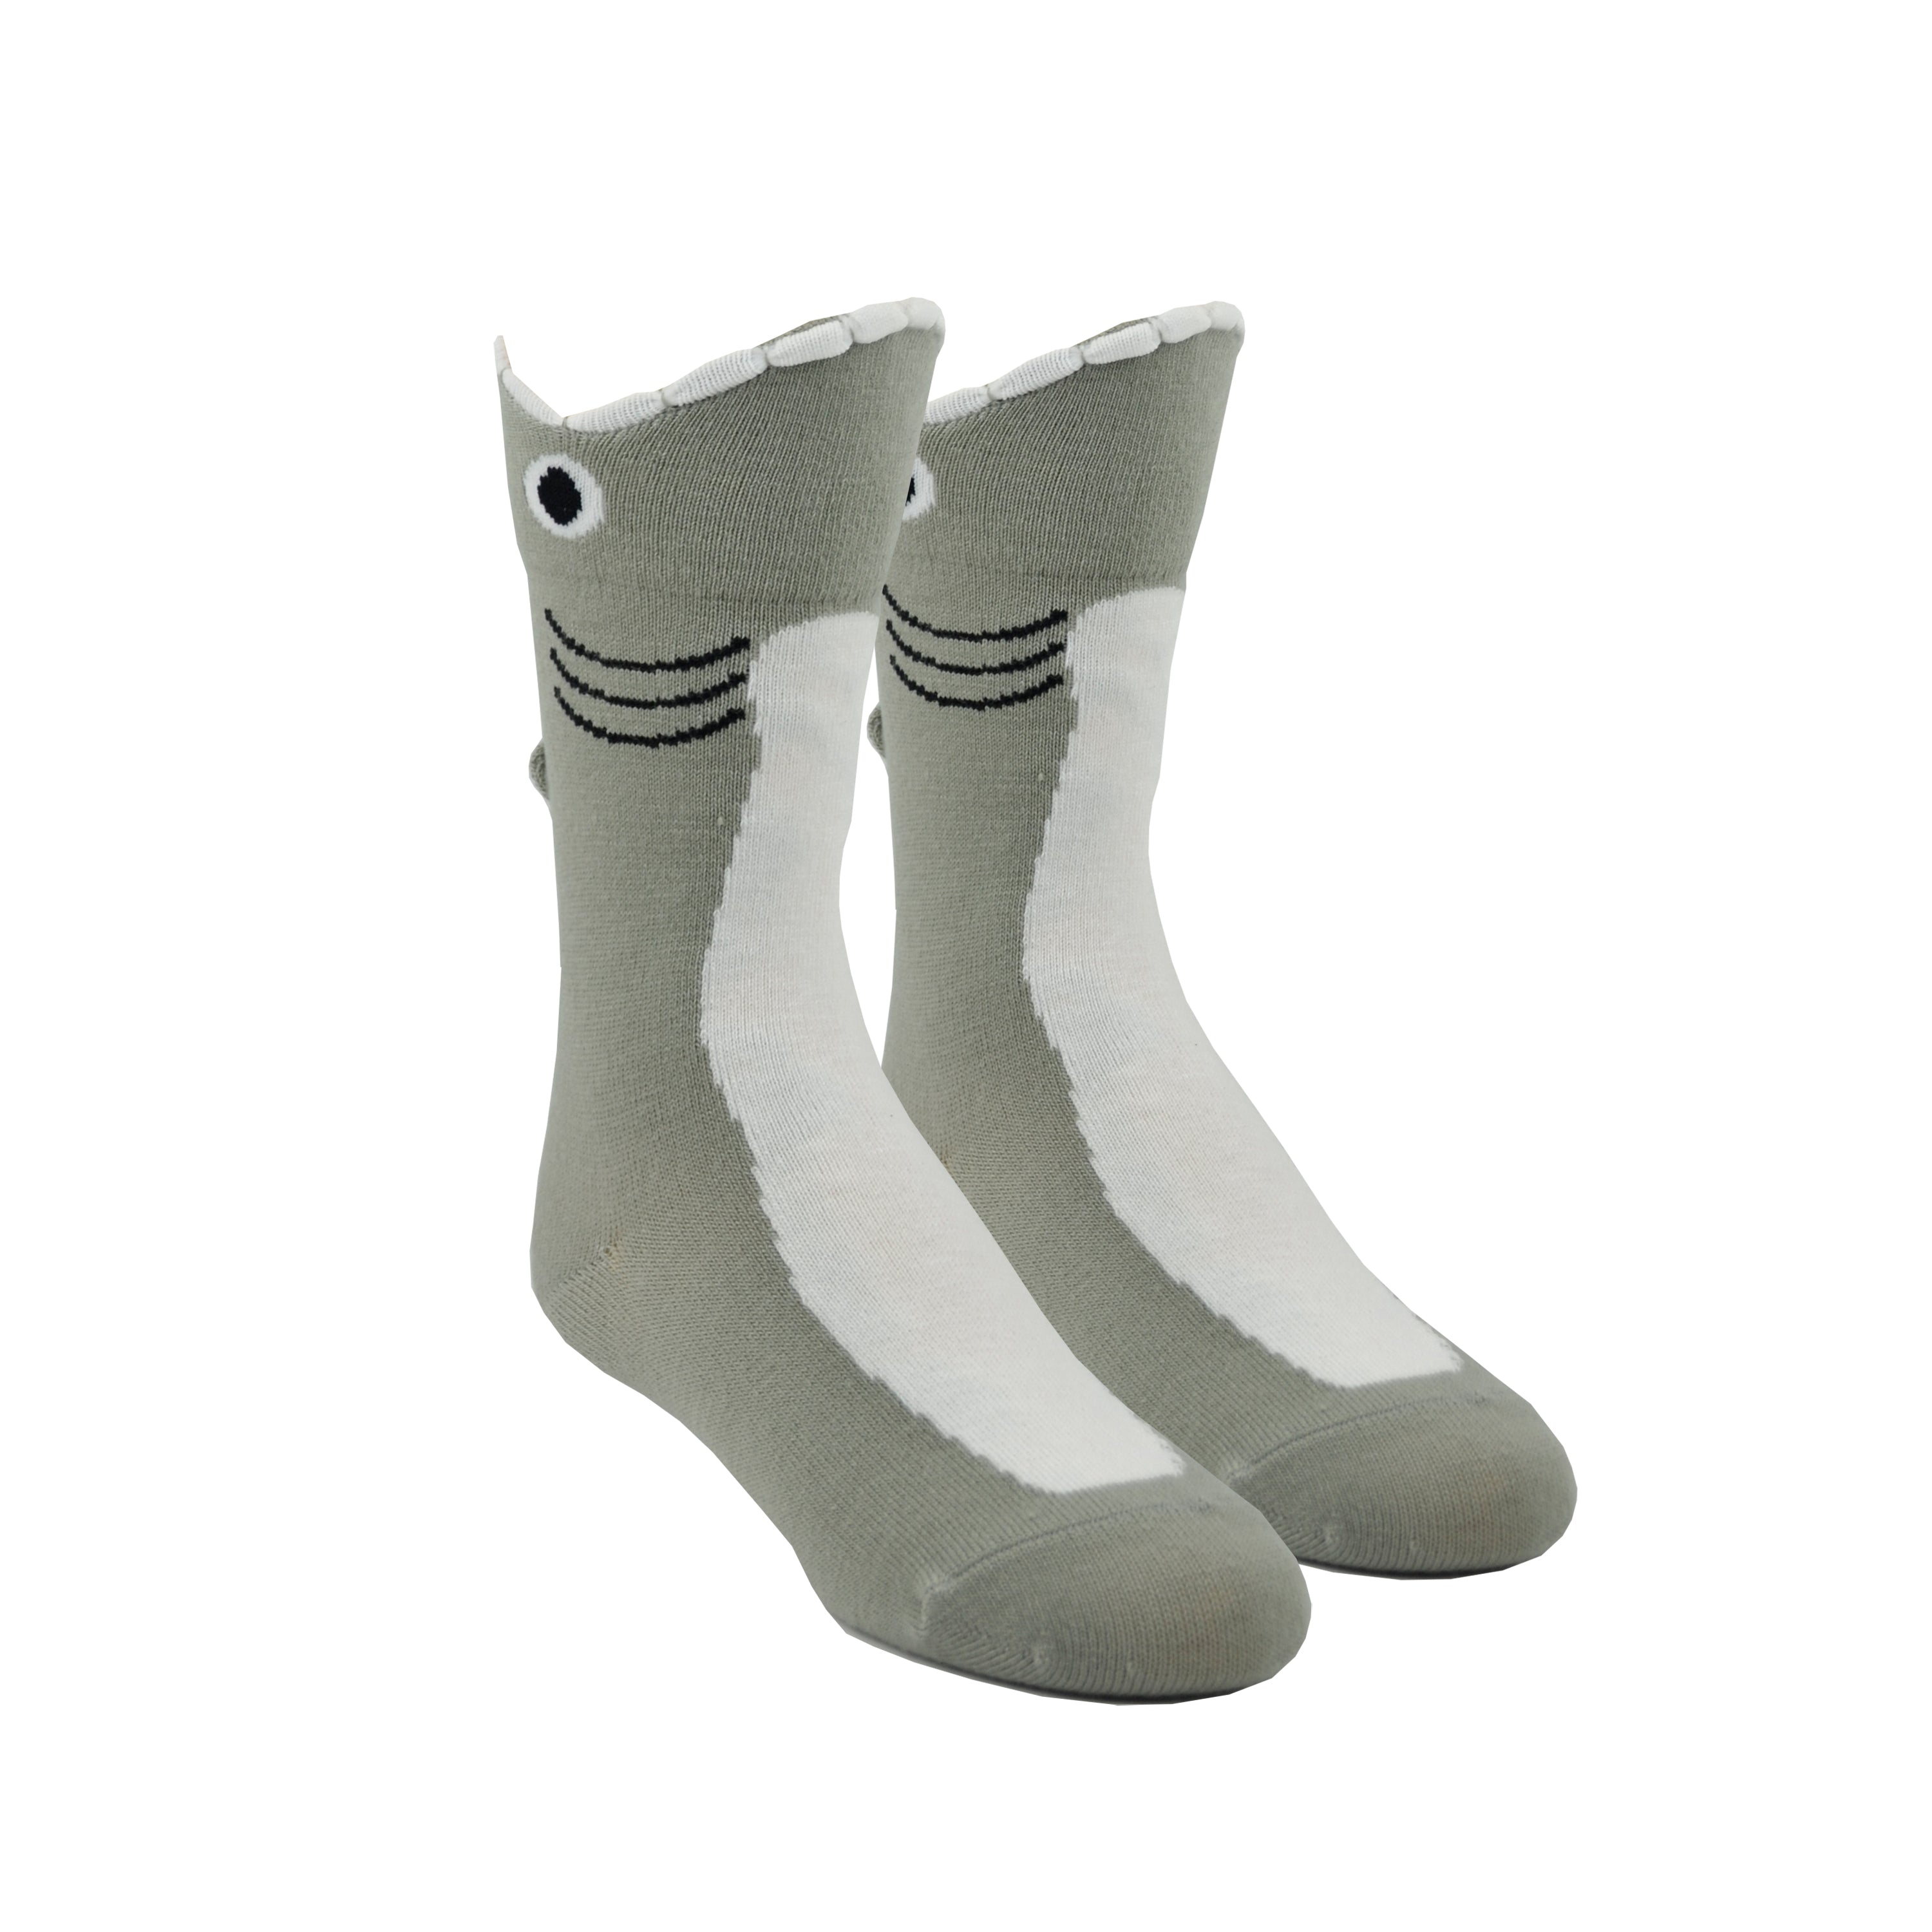 Shown on leg forms, a pair of K.Bell brand kids crew socks in grey. The top of the sock features a fish mouth cuff on a grey sock with a white front.